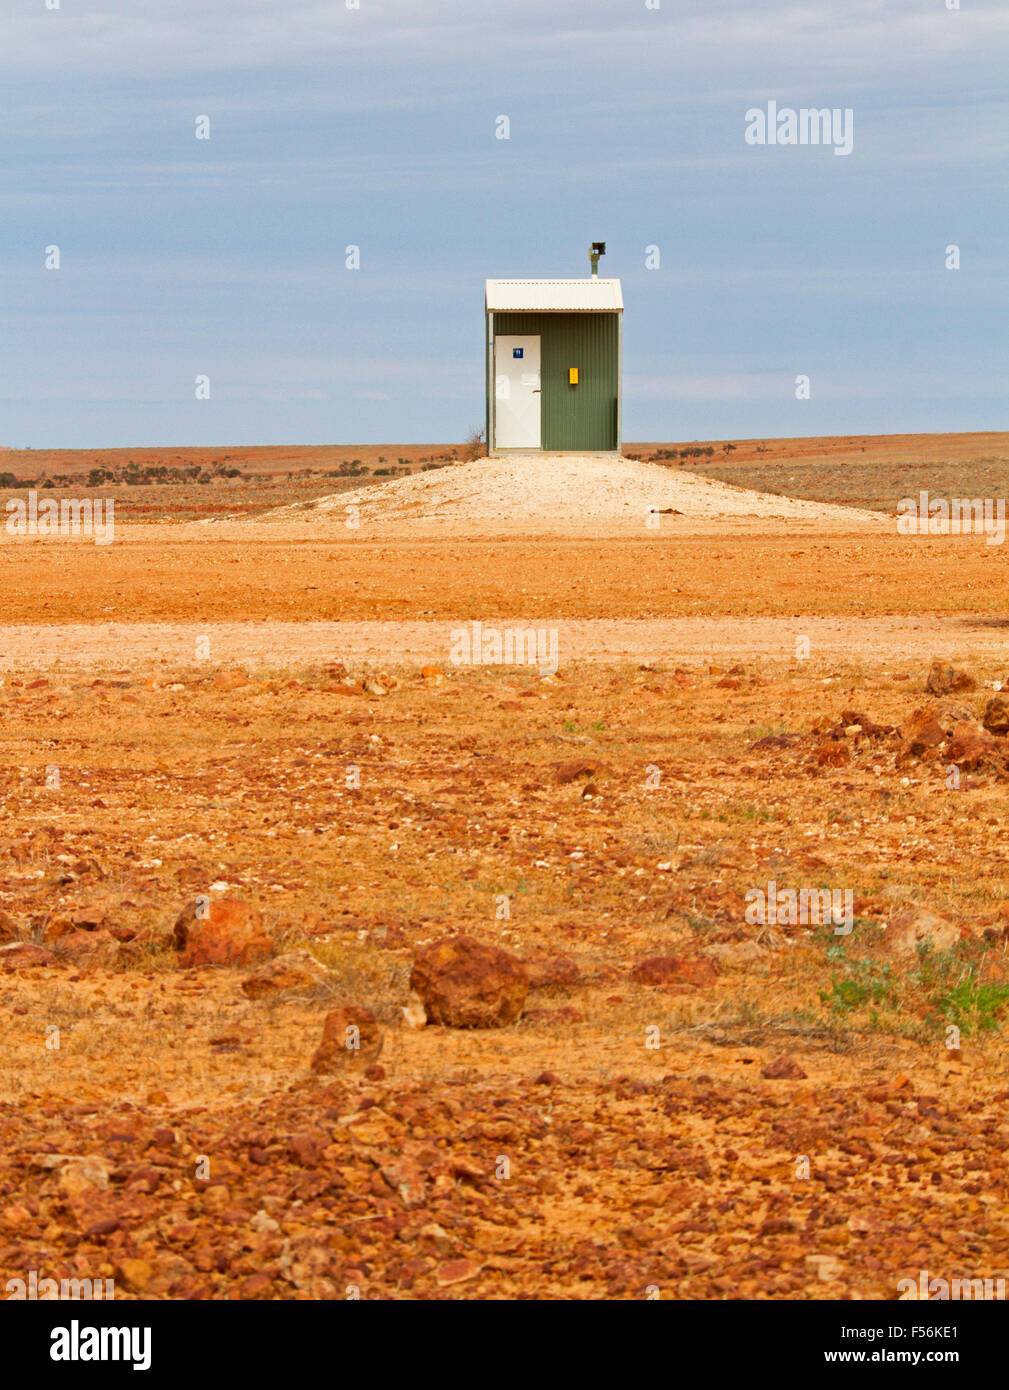 Humourous view of isolated public toilet on vast barren red stony outback plains in remote area of Australia under blue sky Stock Photo